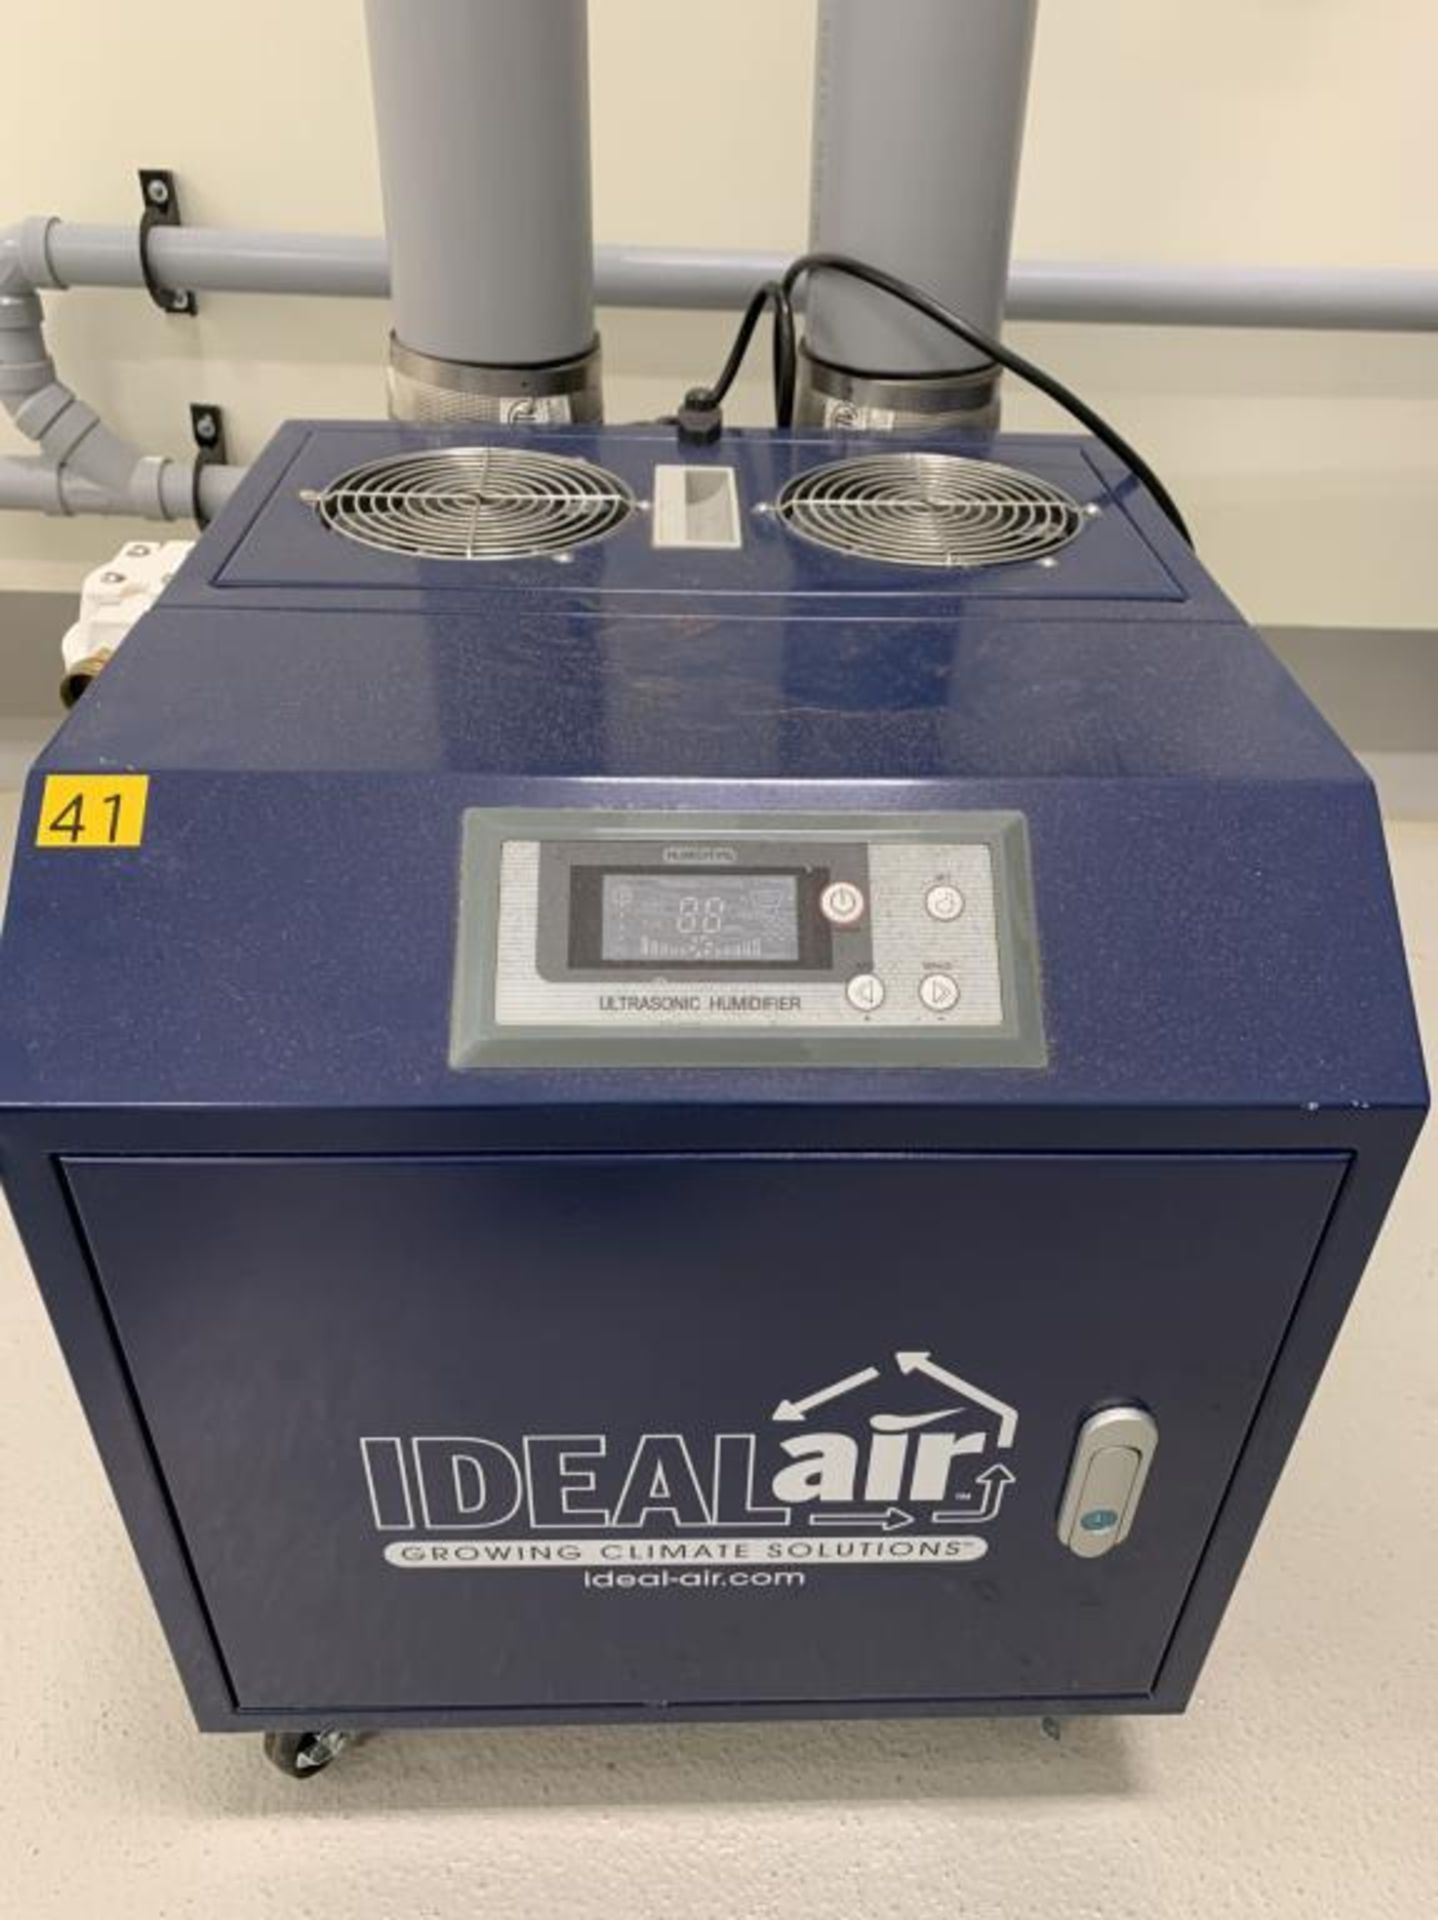 IdealAir 701612 Humidifiers - Image 2 of 3